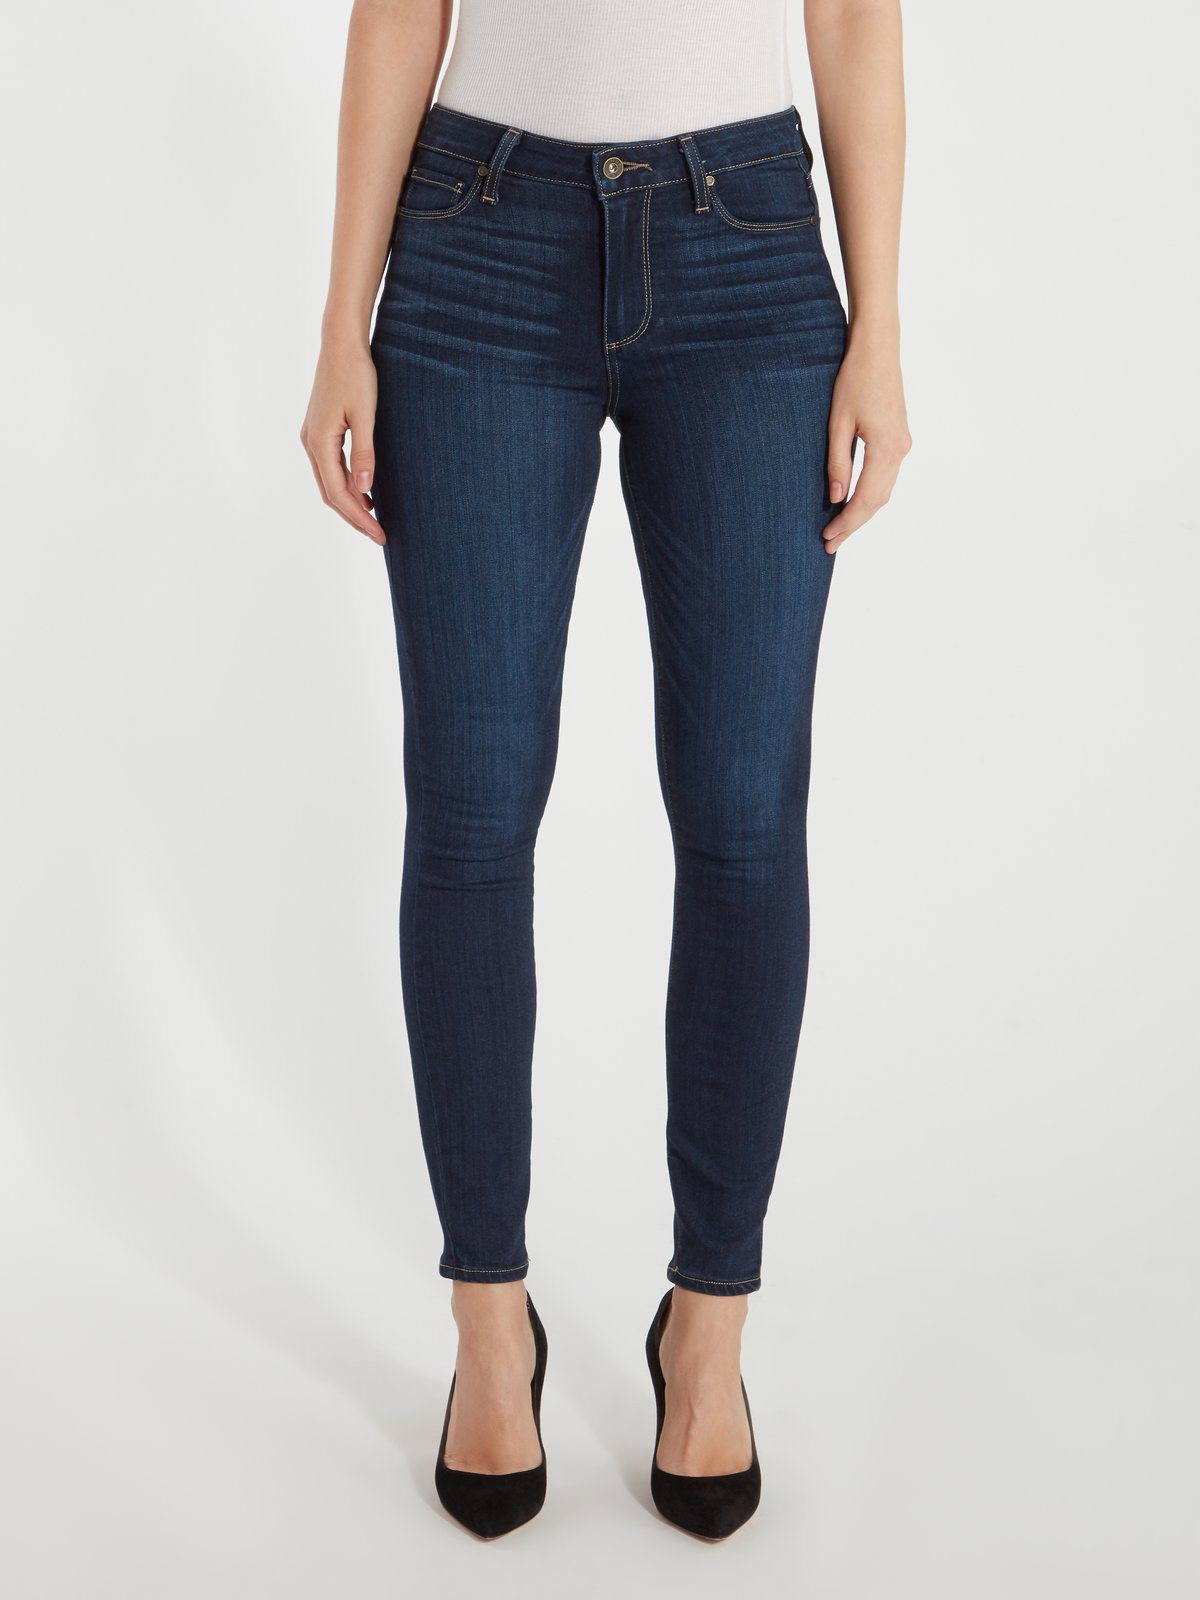 PAIGE Hoxton High Rise Skinny Ankle Jeans | Verishop